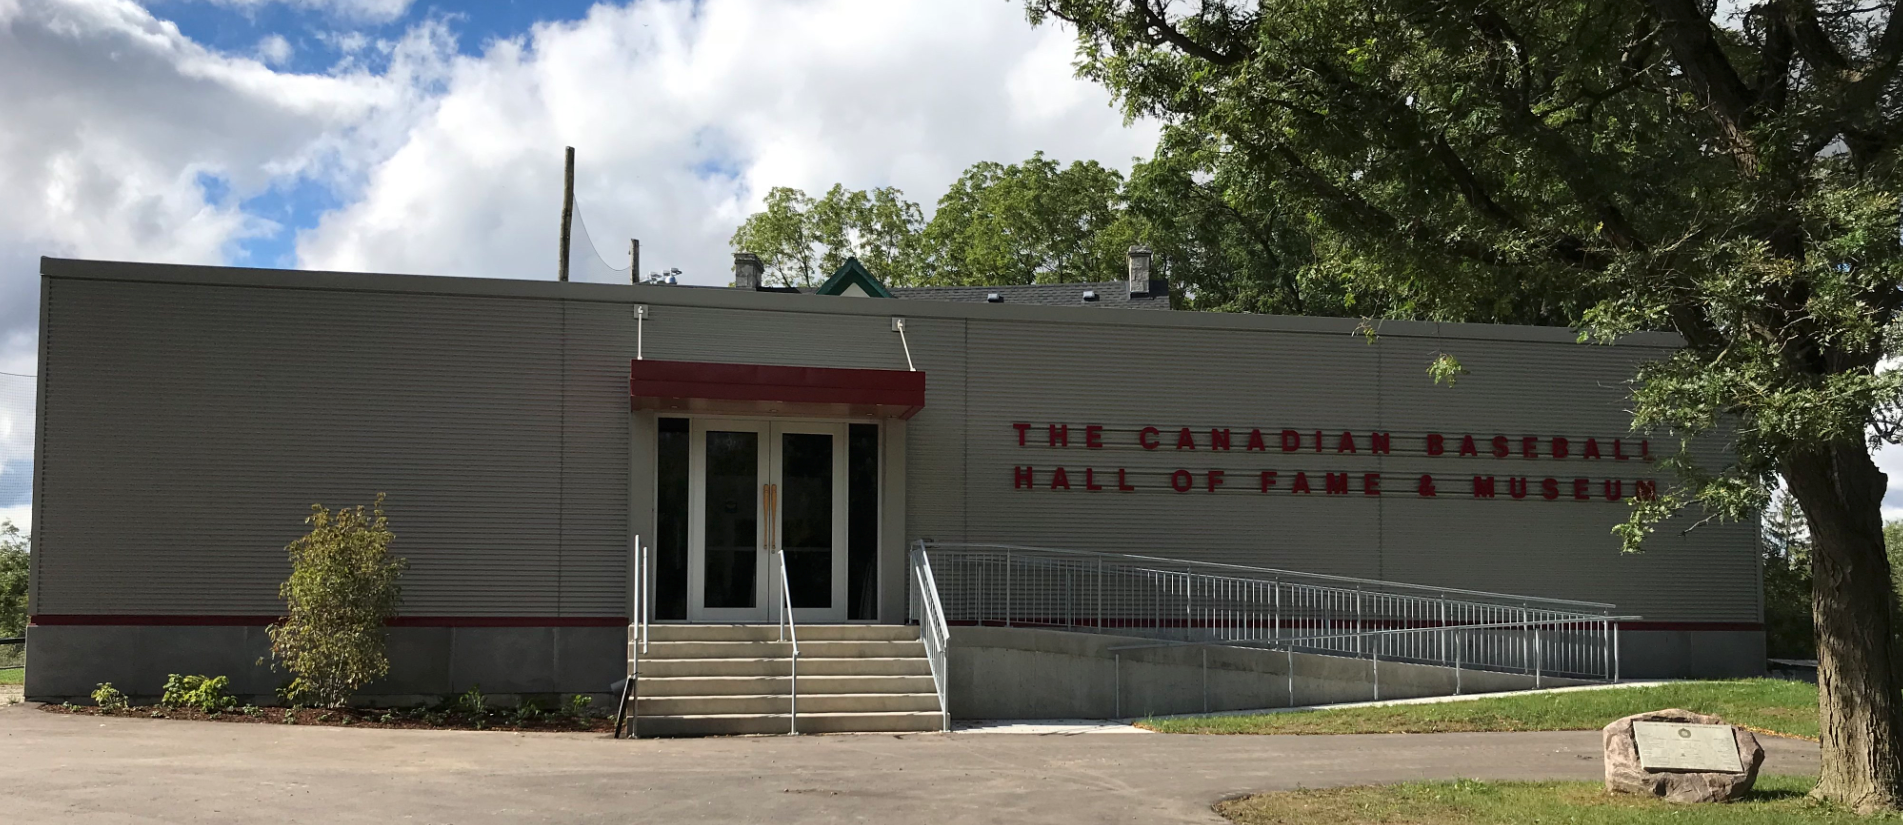 canadian baseball hall of fame set to open